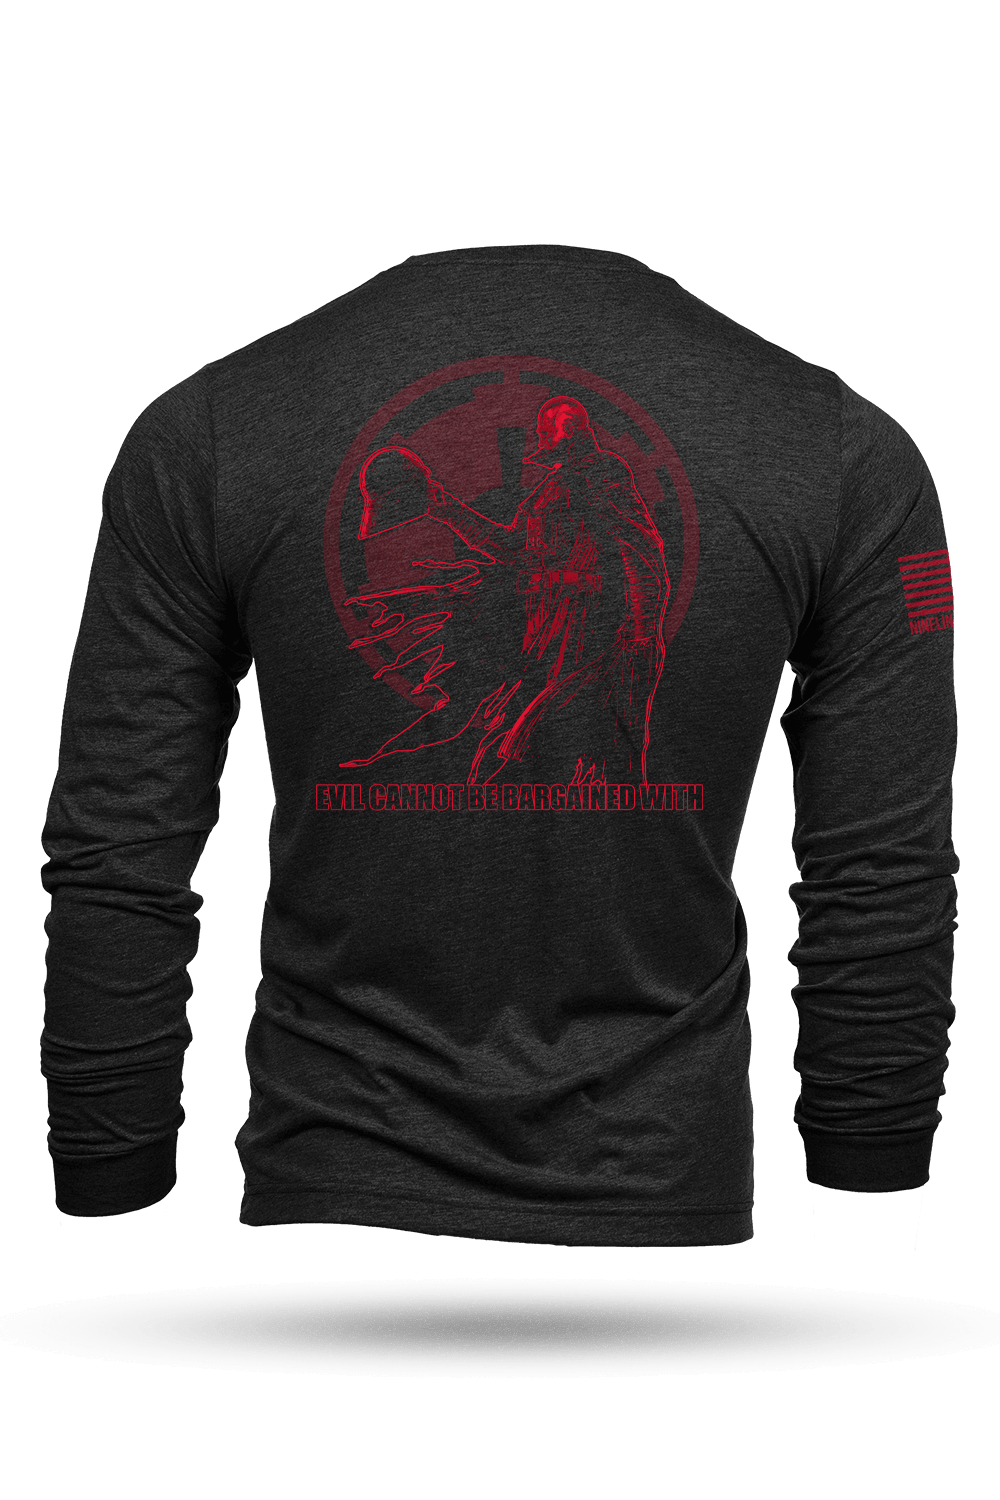 Long-Sleeve Shirt - Evil Cannot Be Bargained With